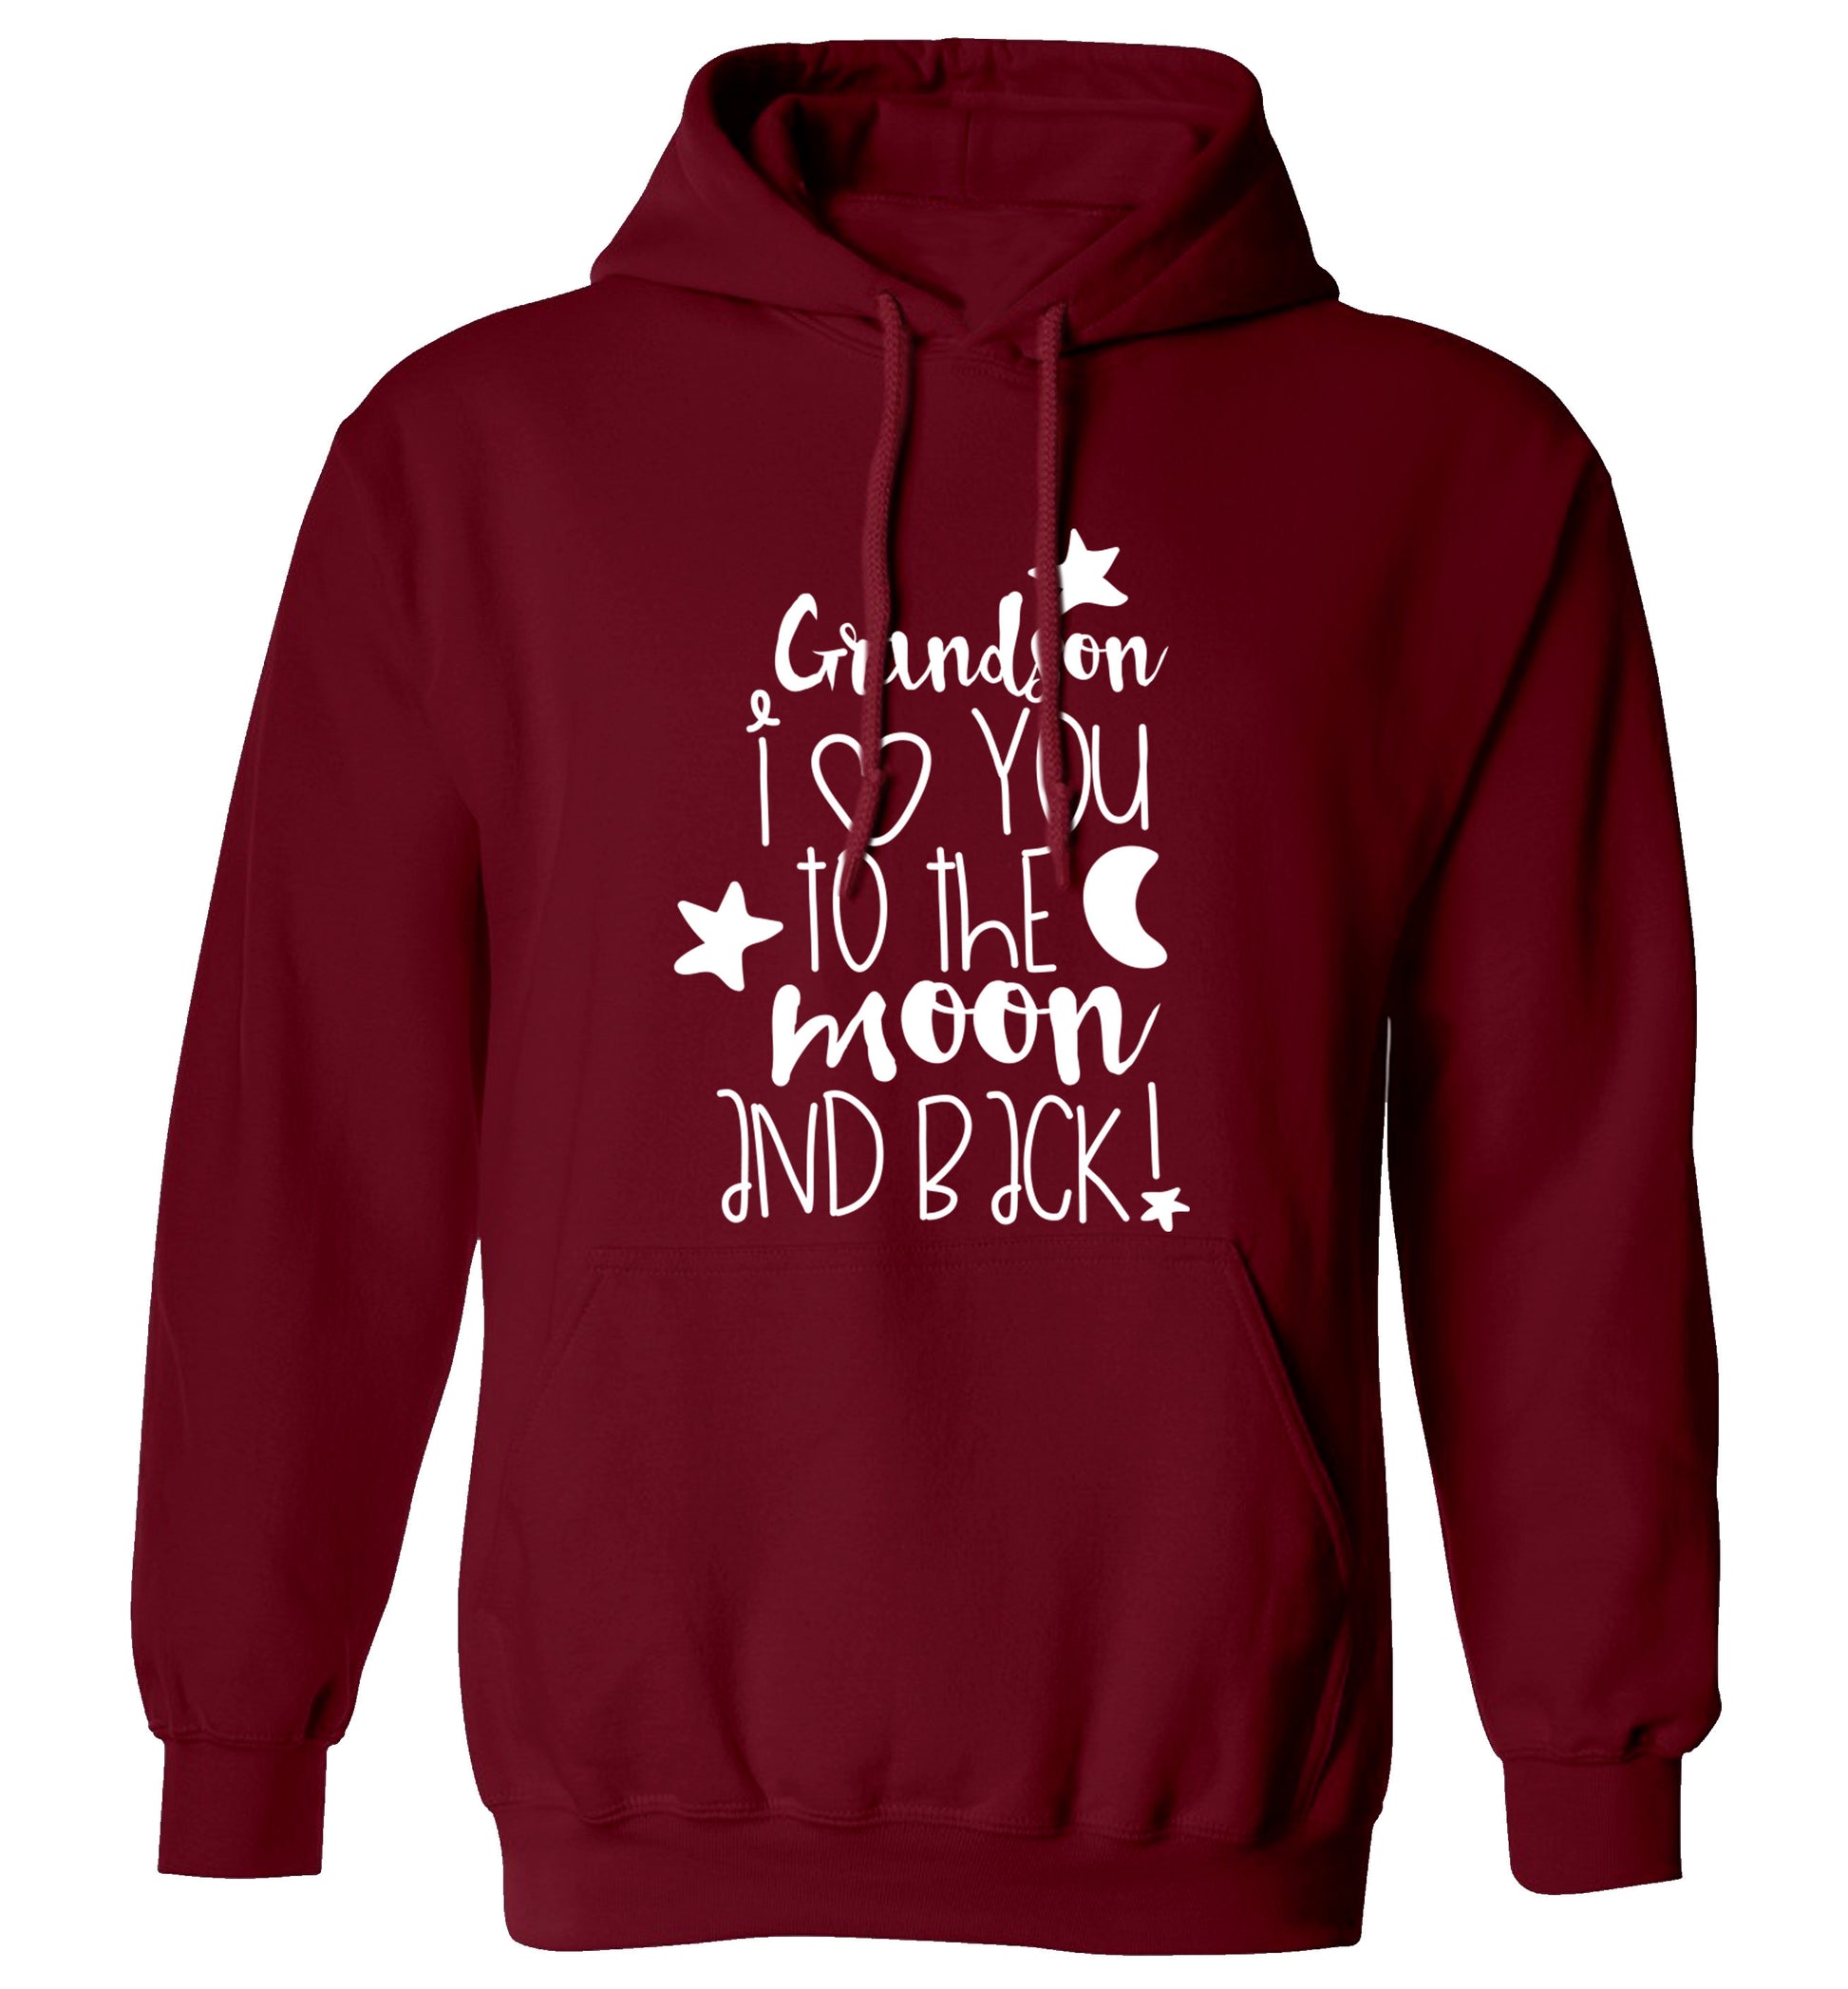 Grandson I love you to the moon and back adults unisex maroon hoodie 2XL